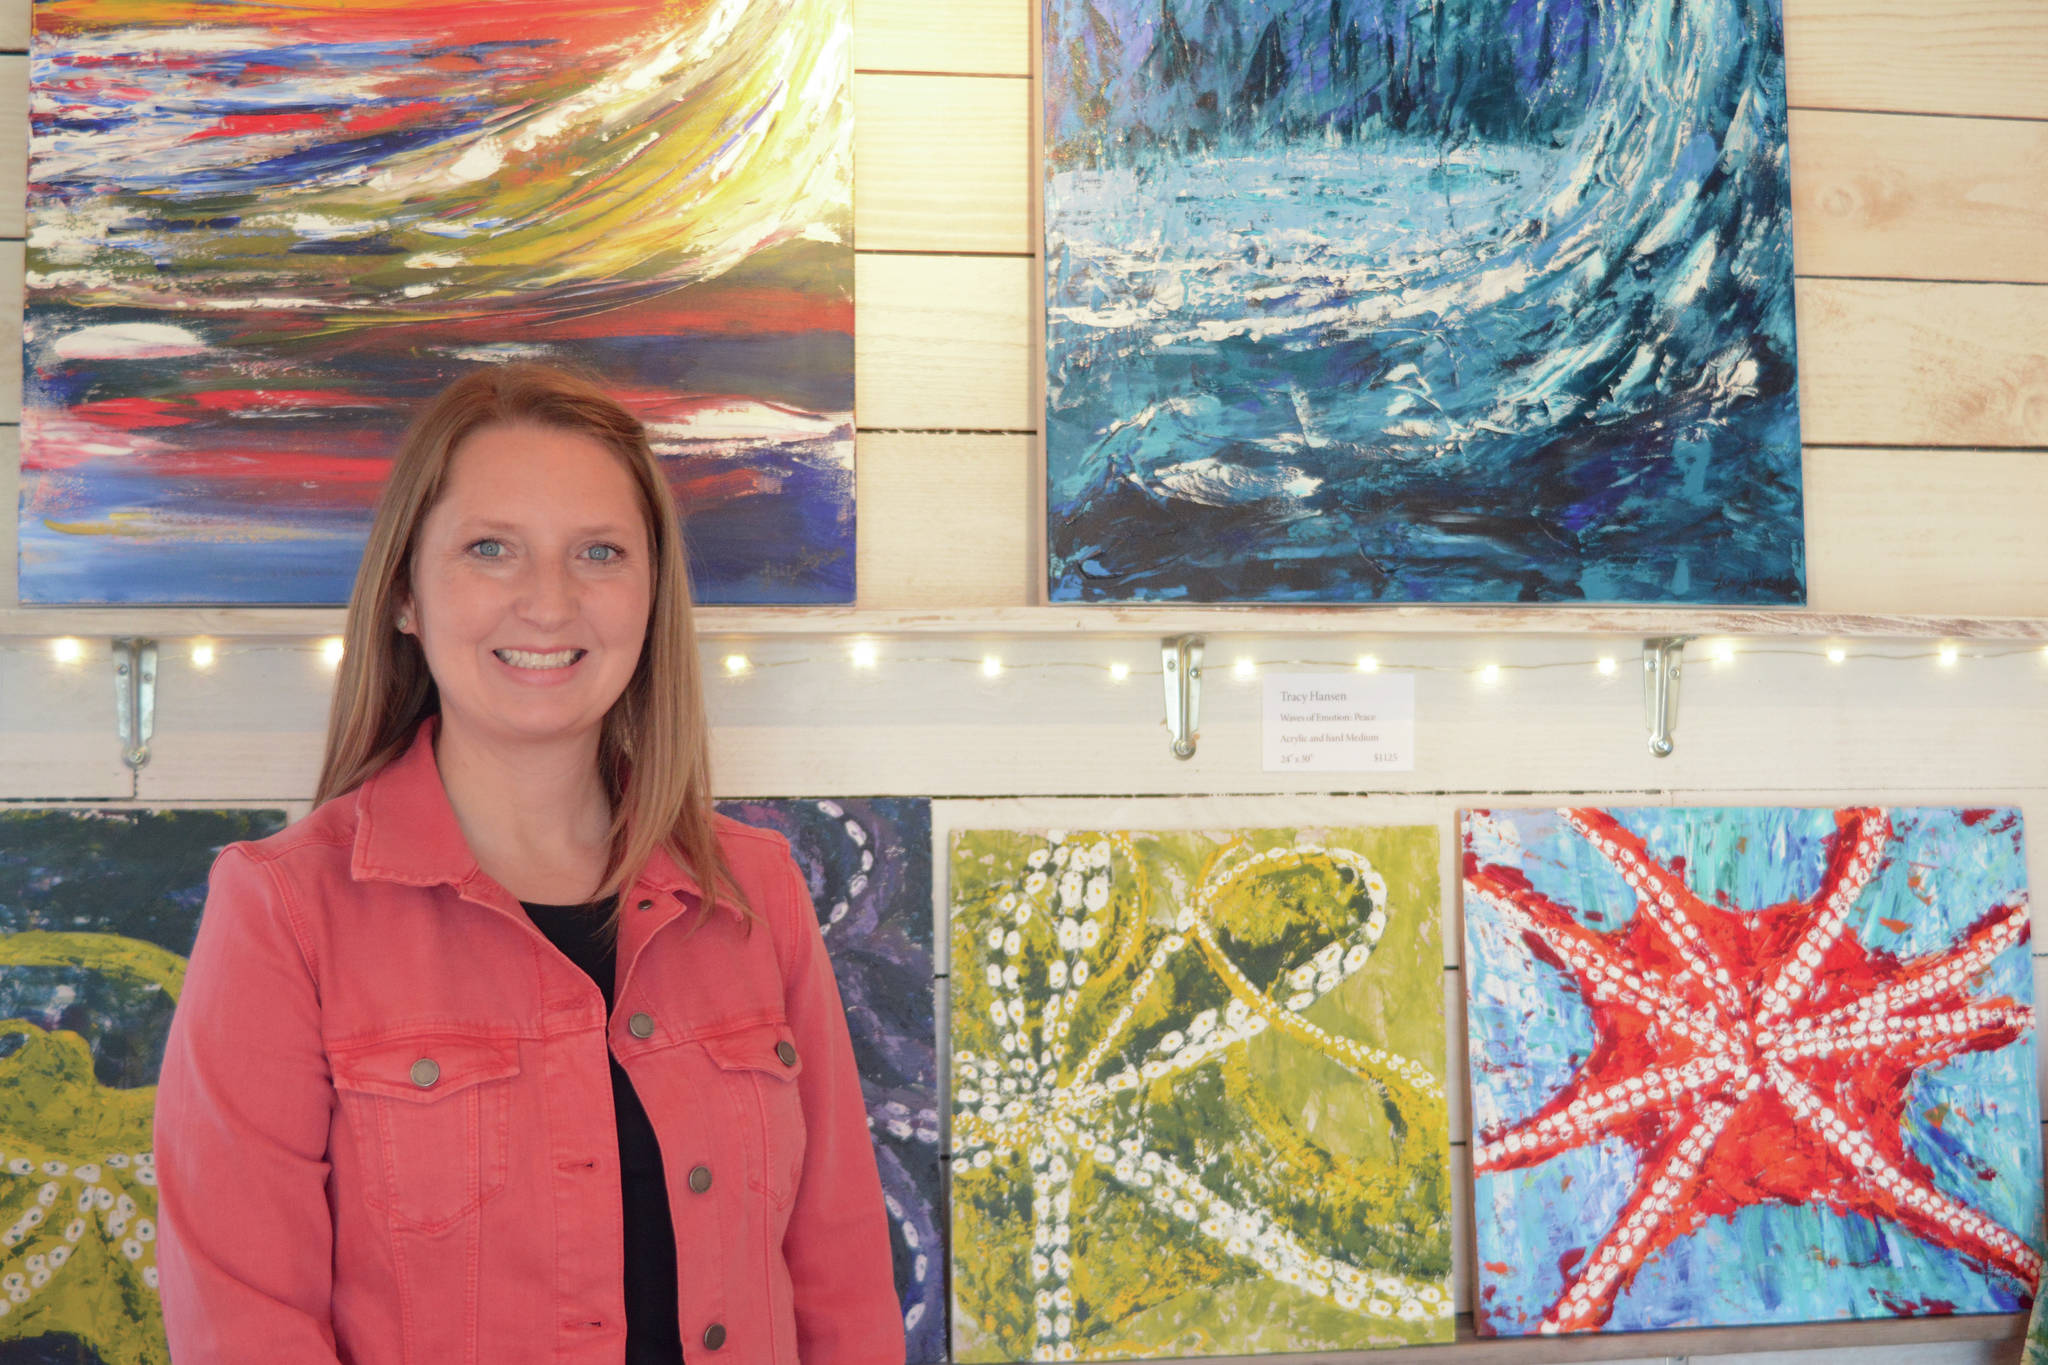 Tracy Hansen poses for a photo in front of her paintings at her Ocean Drive shop, 59 North, on Tuesday, Aug. 10, 2021, in Homer, Alaska. (Photo by Michael Armstrong/Homer News)